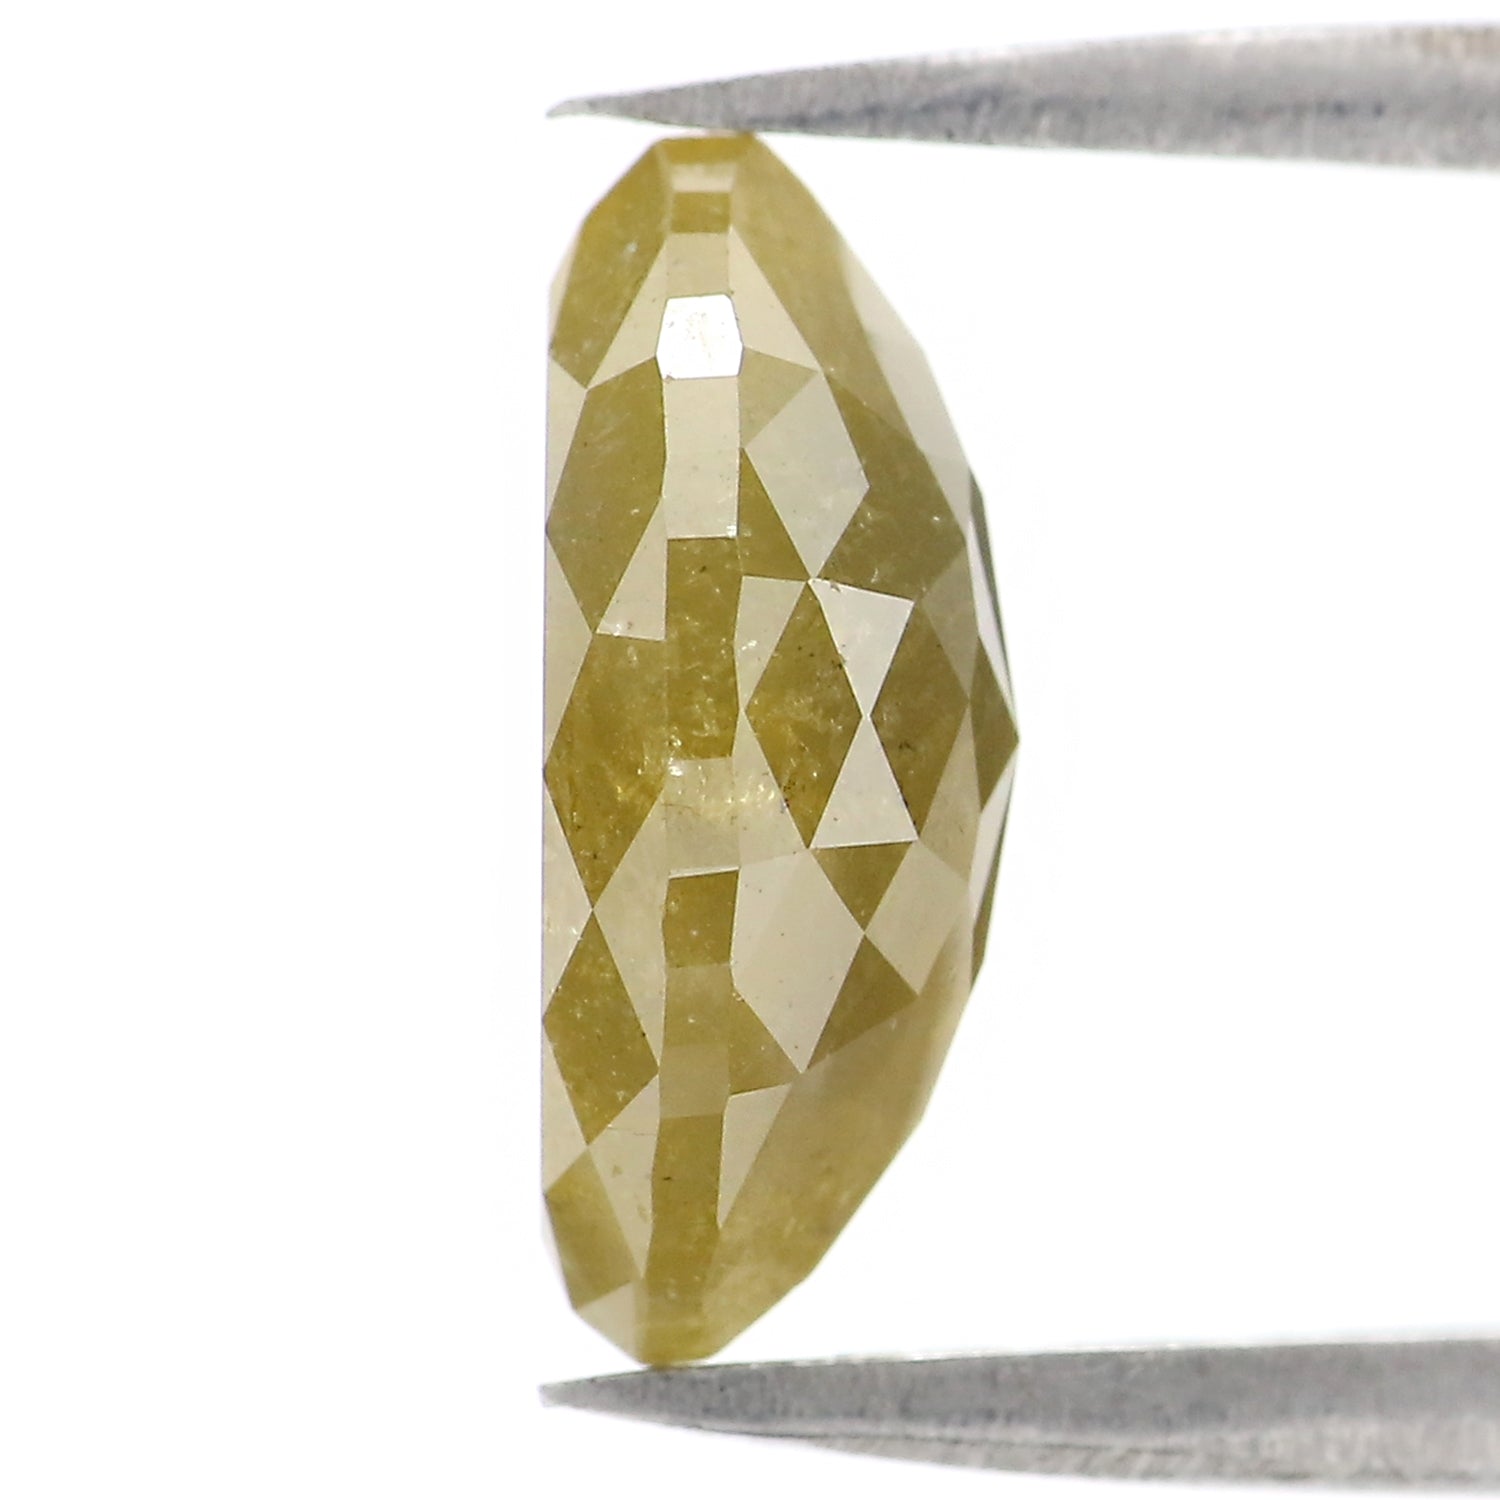 Natural Loose Marquise Diamond, Yellow Color Diamond, Natural Loose Diamond Marquise Rose Cut Diamond 3.06 CT Marquise Shape Diamond KDL6773